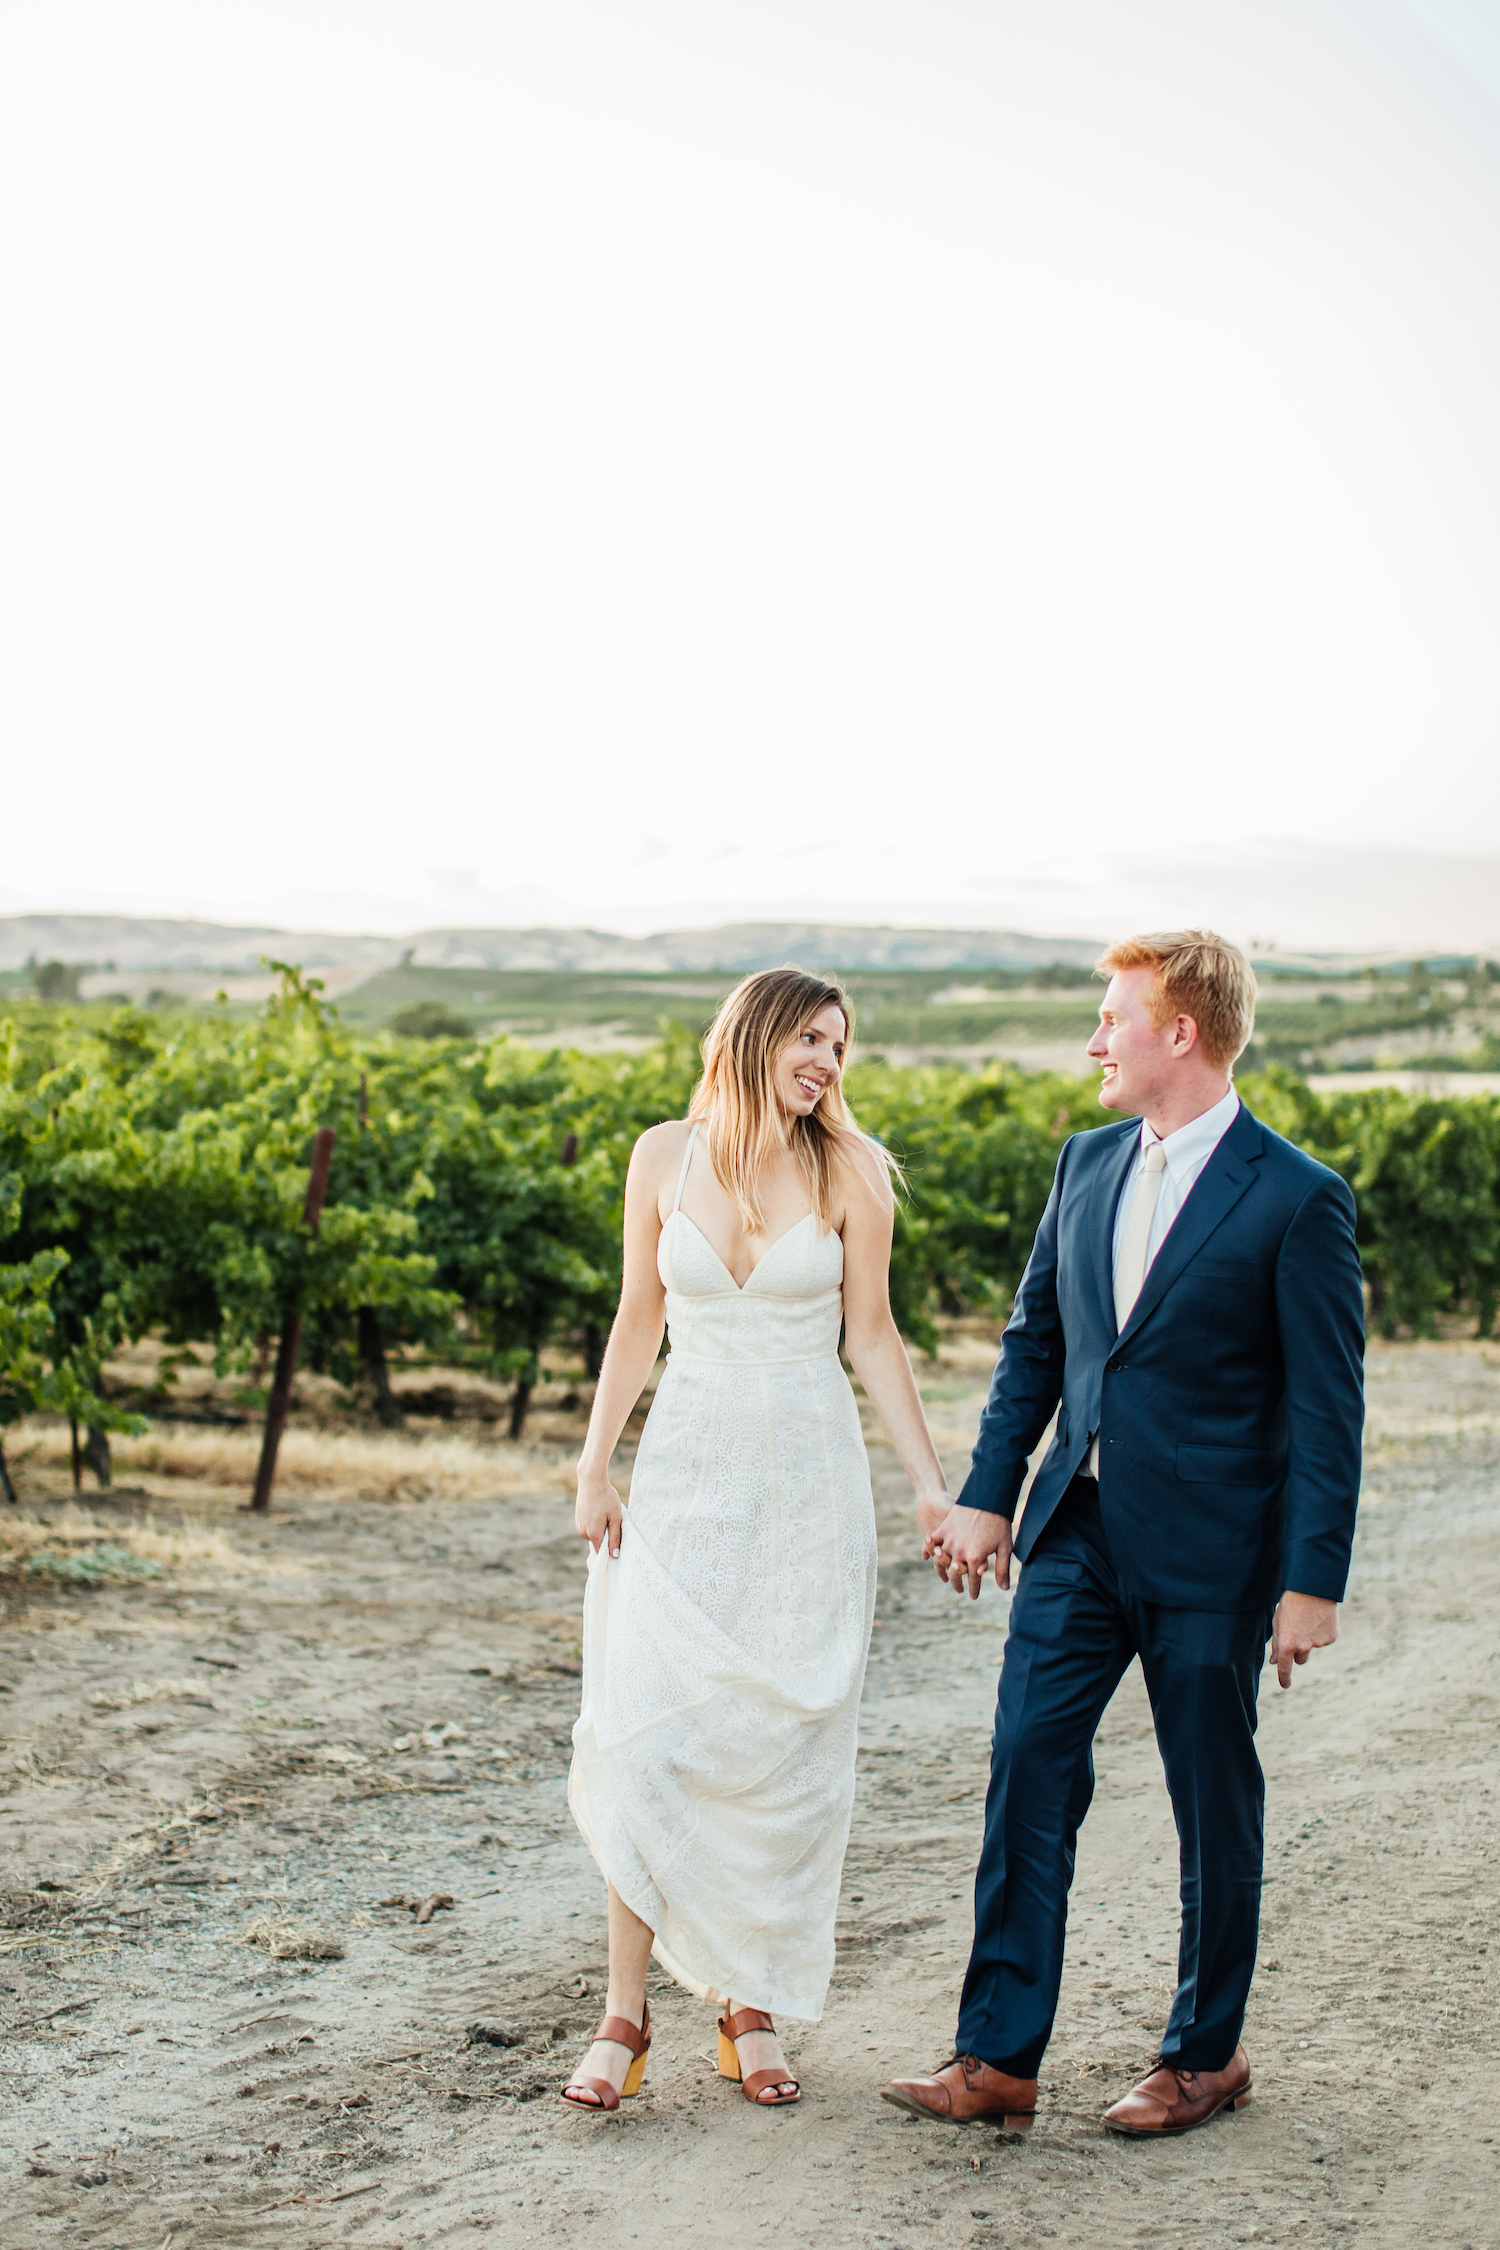 Intimate Elopement on the Central California Coast